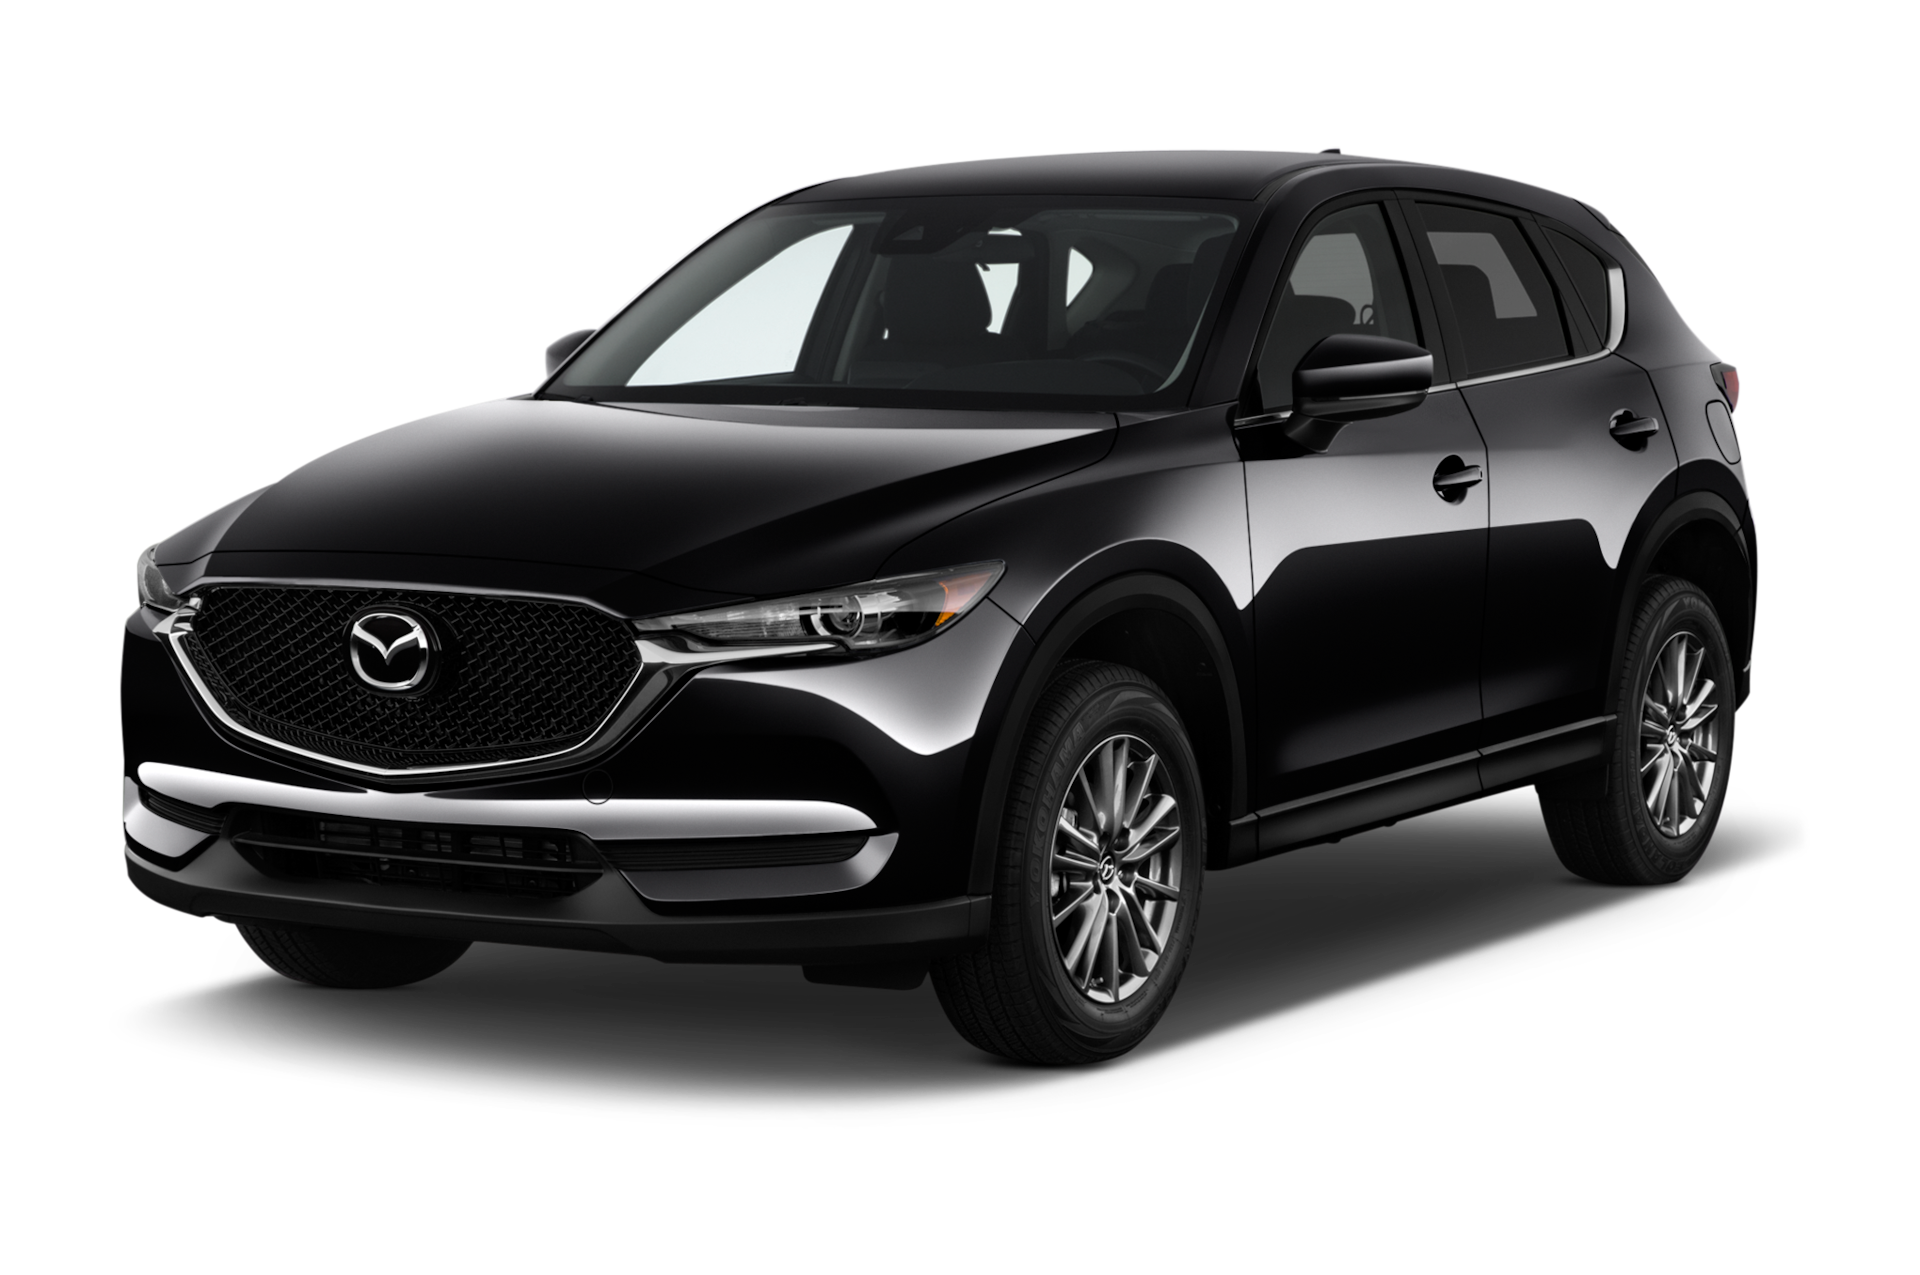 2018 Mazda CX-5 Prices, Reviews, and Photos - MotorTrend